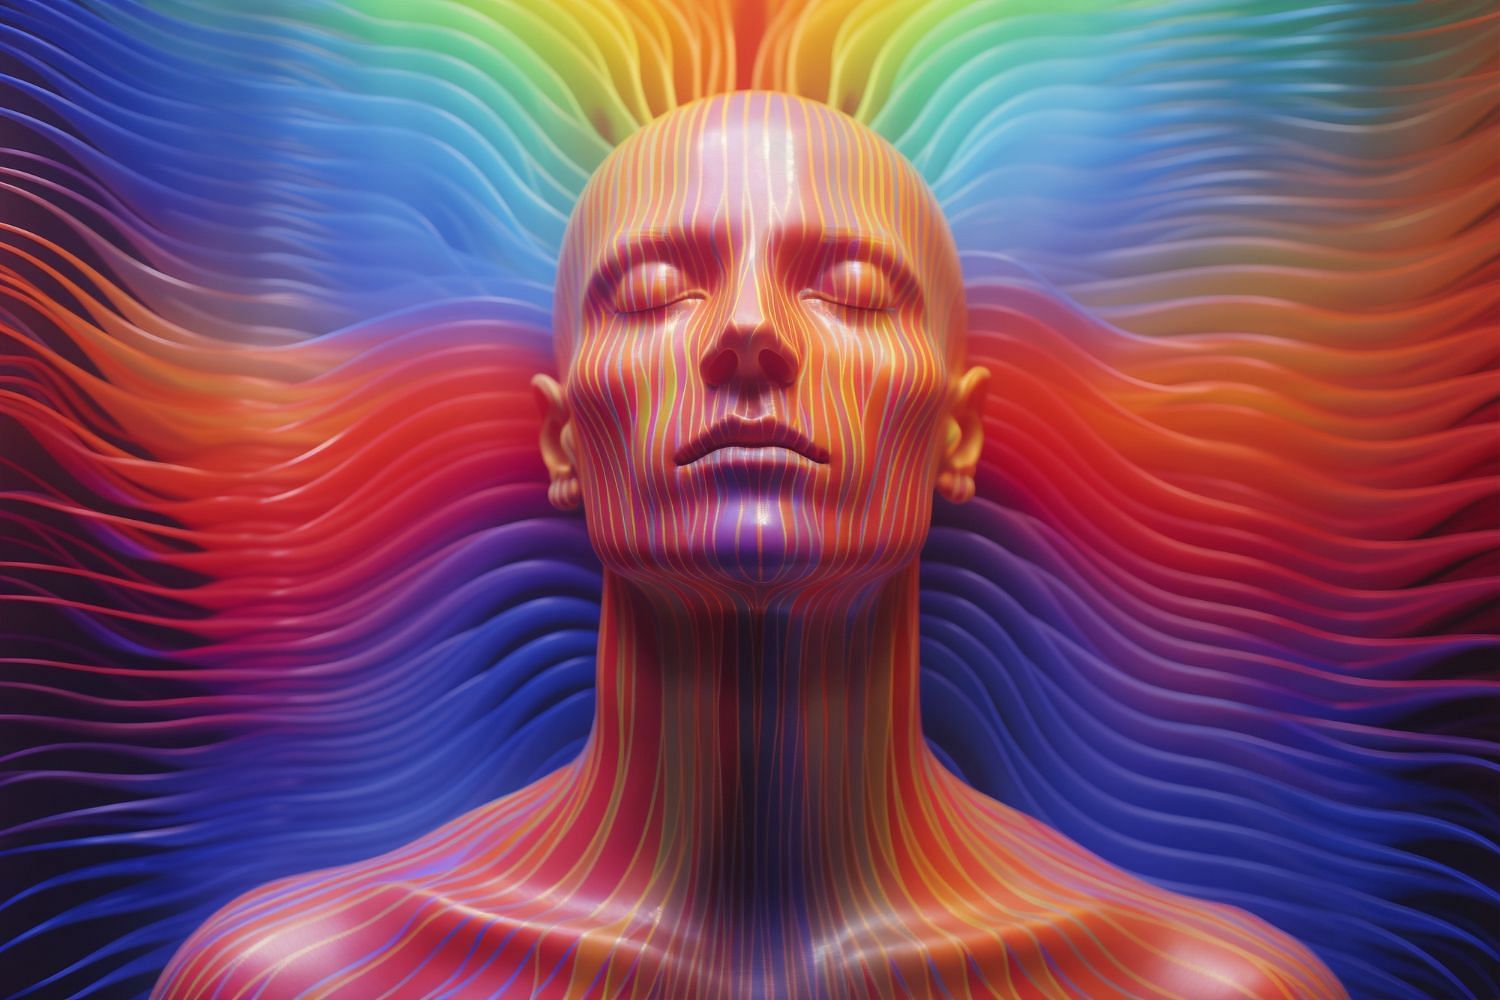 Hypnosis may not look as dramatic and vivid as this, but it can be a powerful alternative to medication and talk therapy. (Image via Freepik/ Freepik)